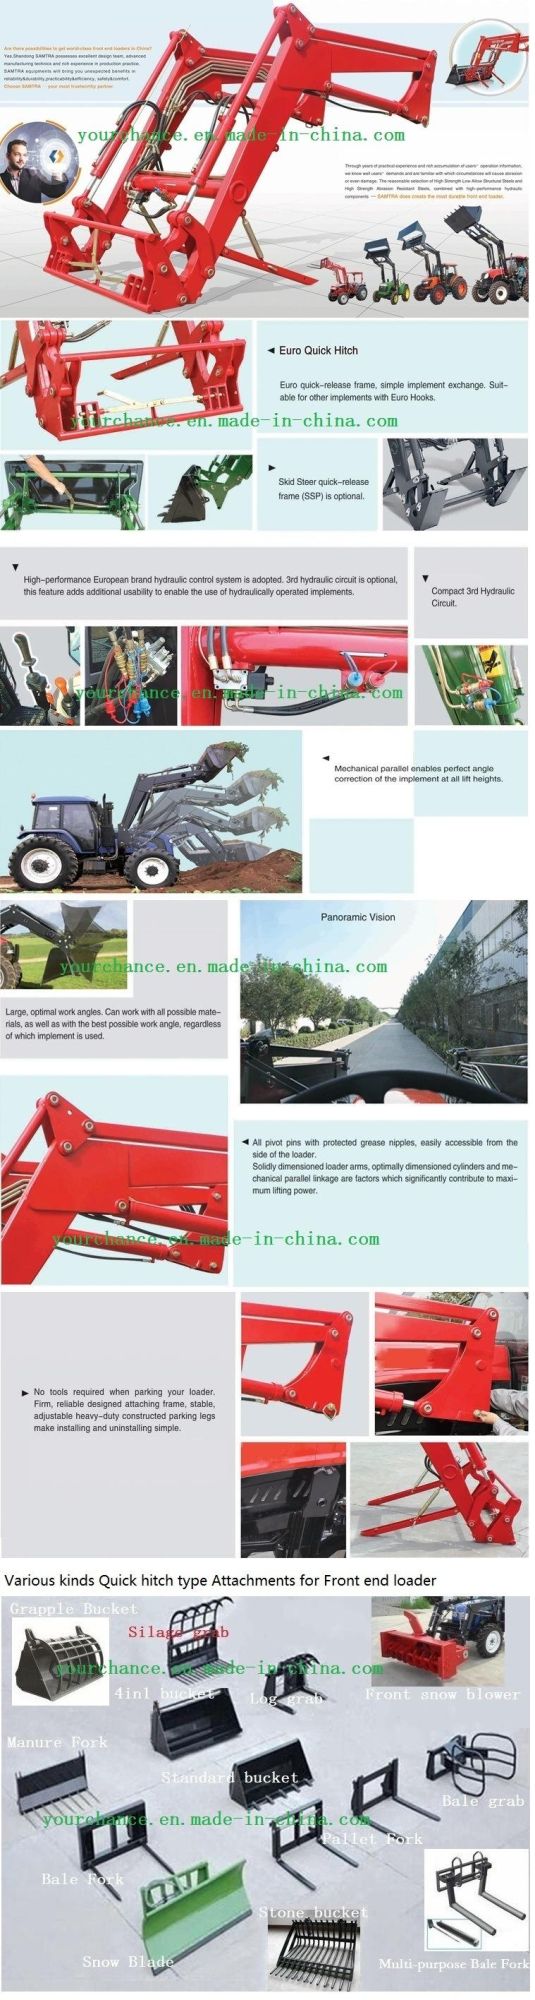 Europe Hot Sale Tz04D Front End Loader with Ce Certificate for 30-55HP Wheel Tractor